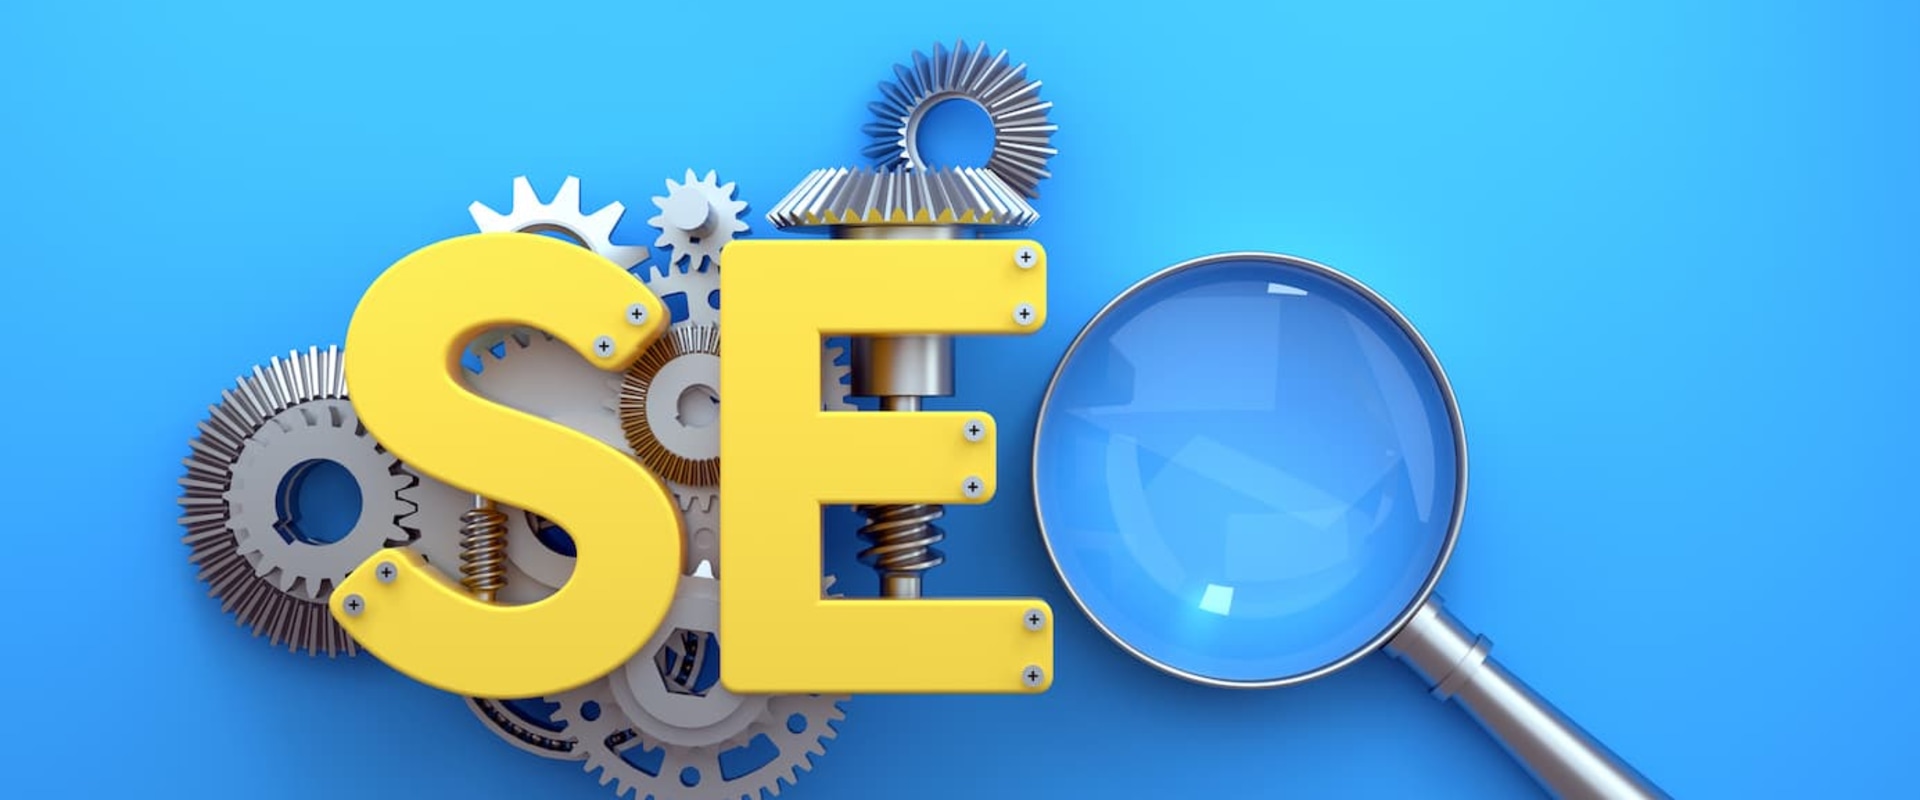 How do i get search engine optimization?